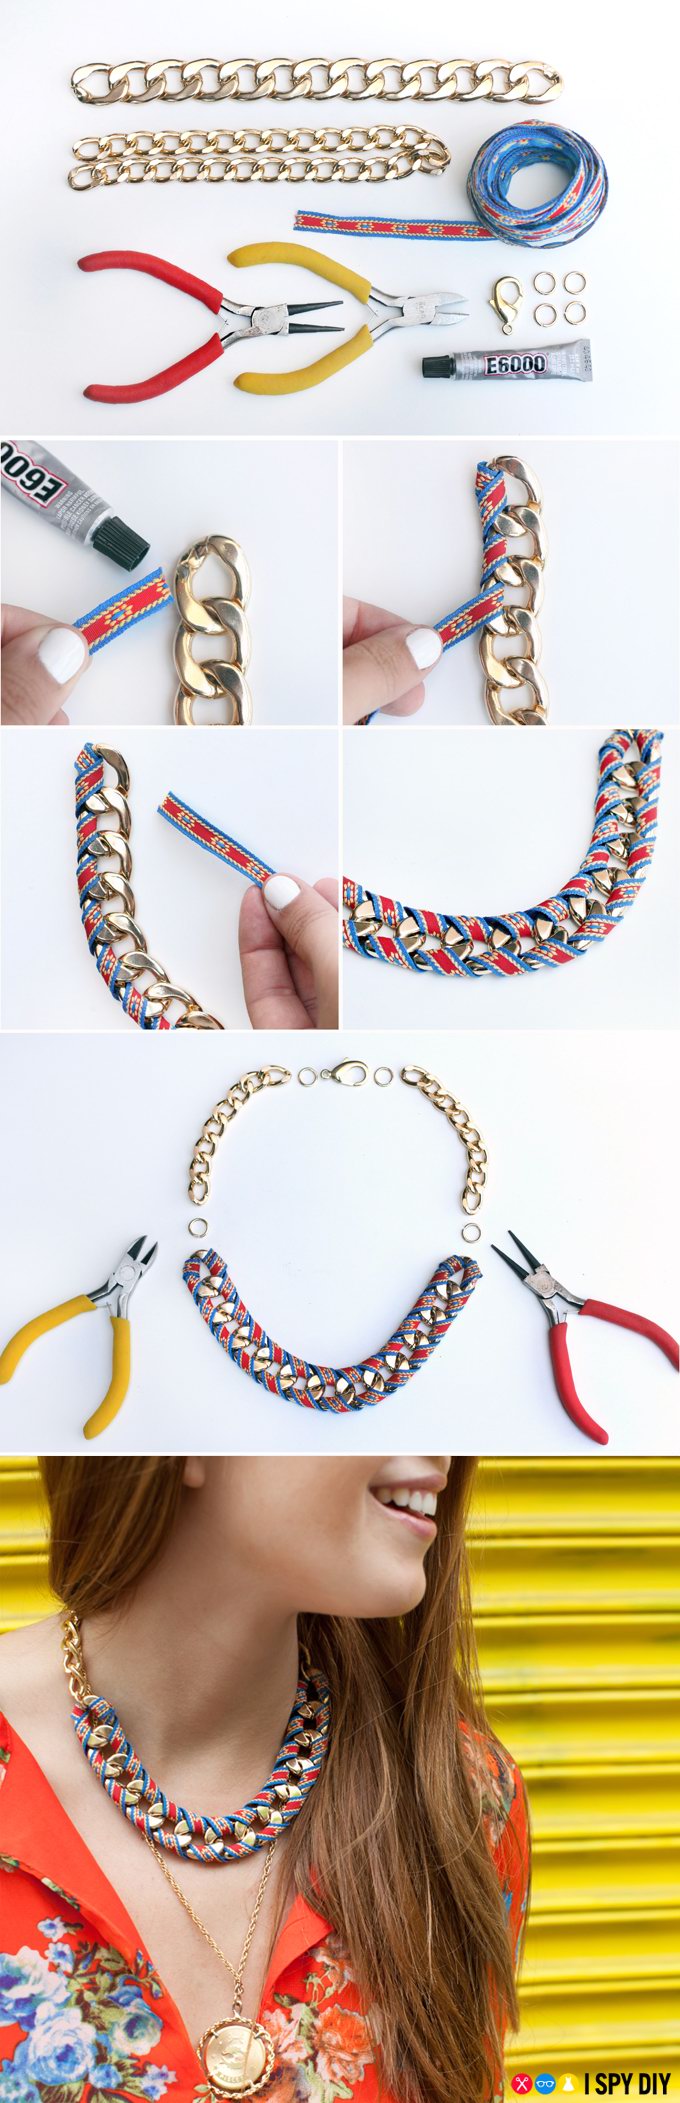 DIY Chain Ribbon Necklace